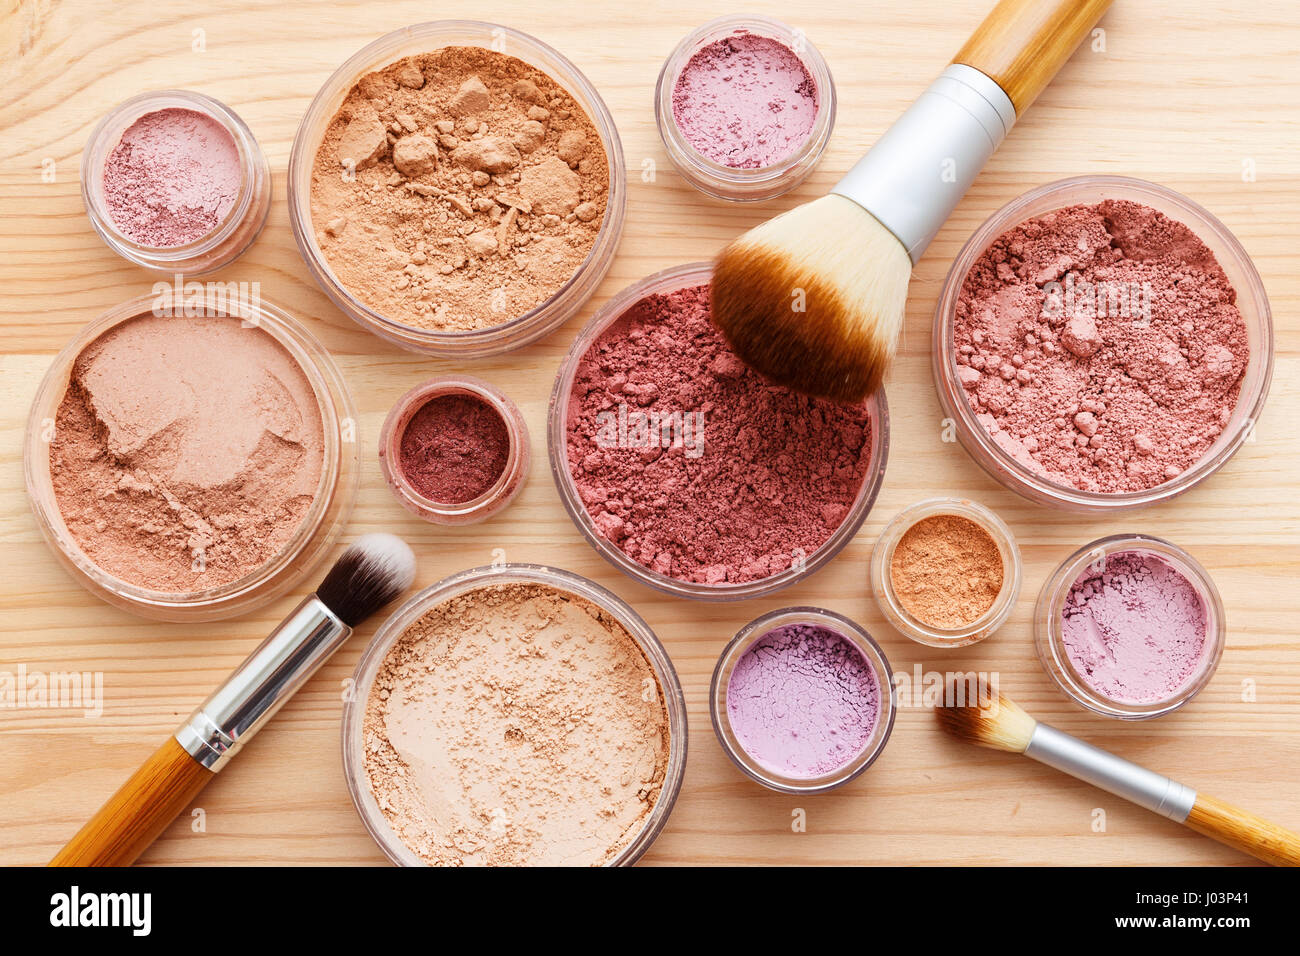 Makeup powder products with foundation blush eye shadow and brush flat lay Stock Photo